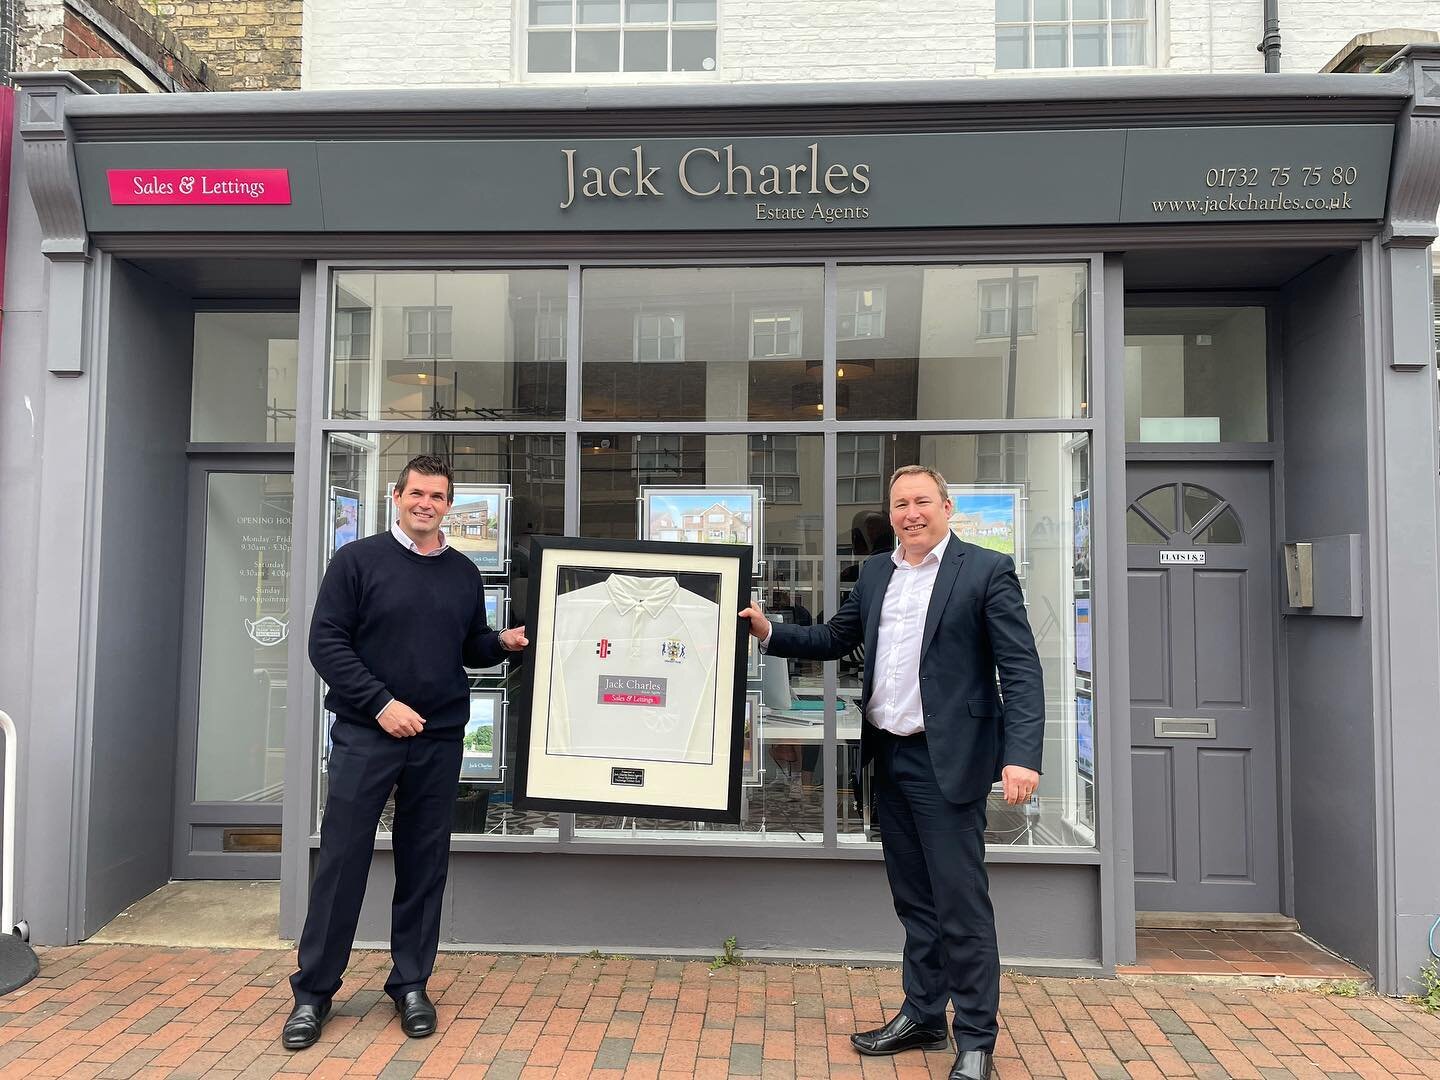 One of our main sponsors @jackcharles2020 standing outside their Tonbridge branch with their very own TCC shirt to take pride of place in their office.

Thanks to James, Shaun and their team for their ongoing support of the club. A proper Tonbridge b